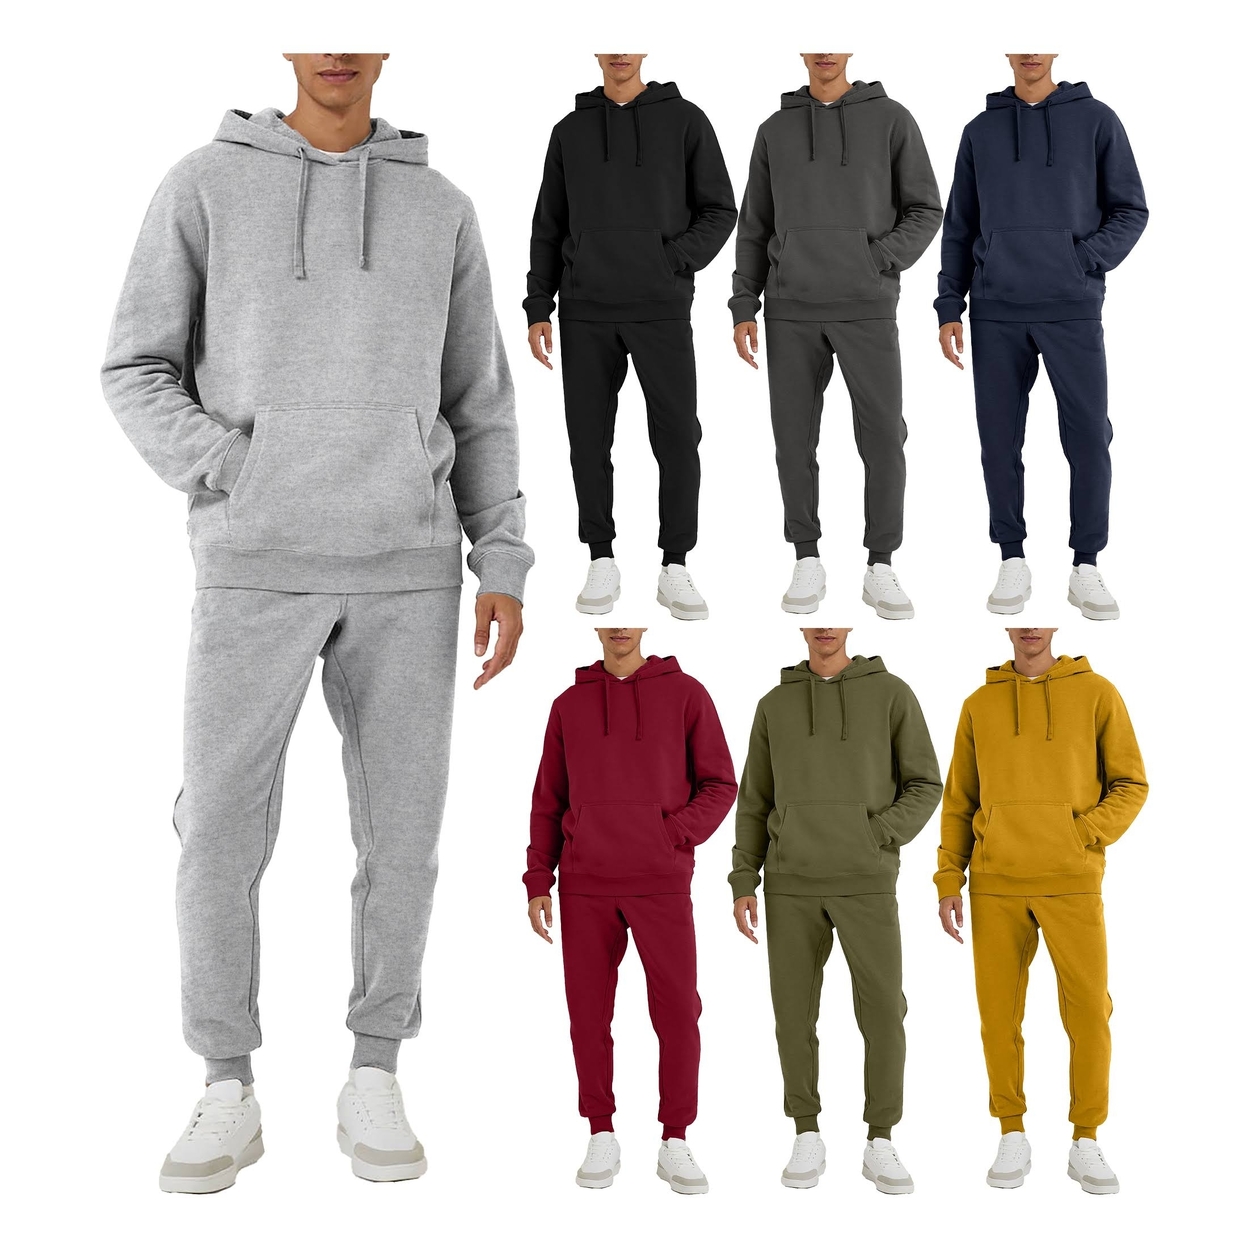 2-Pack: Men's Big & Tall Athletic Active Jogging Winter Warm Fleece Lined Pullover Tracksuit Set - Grey, Small